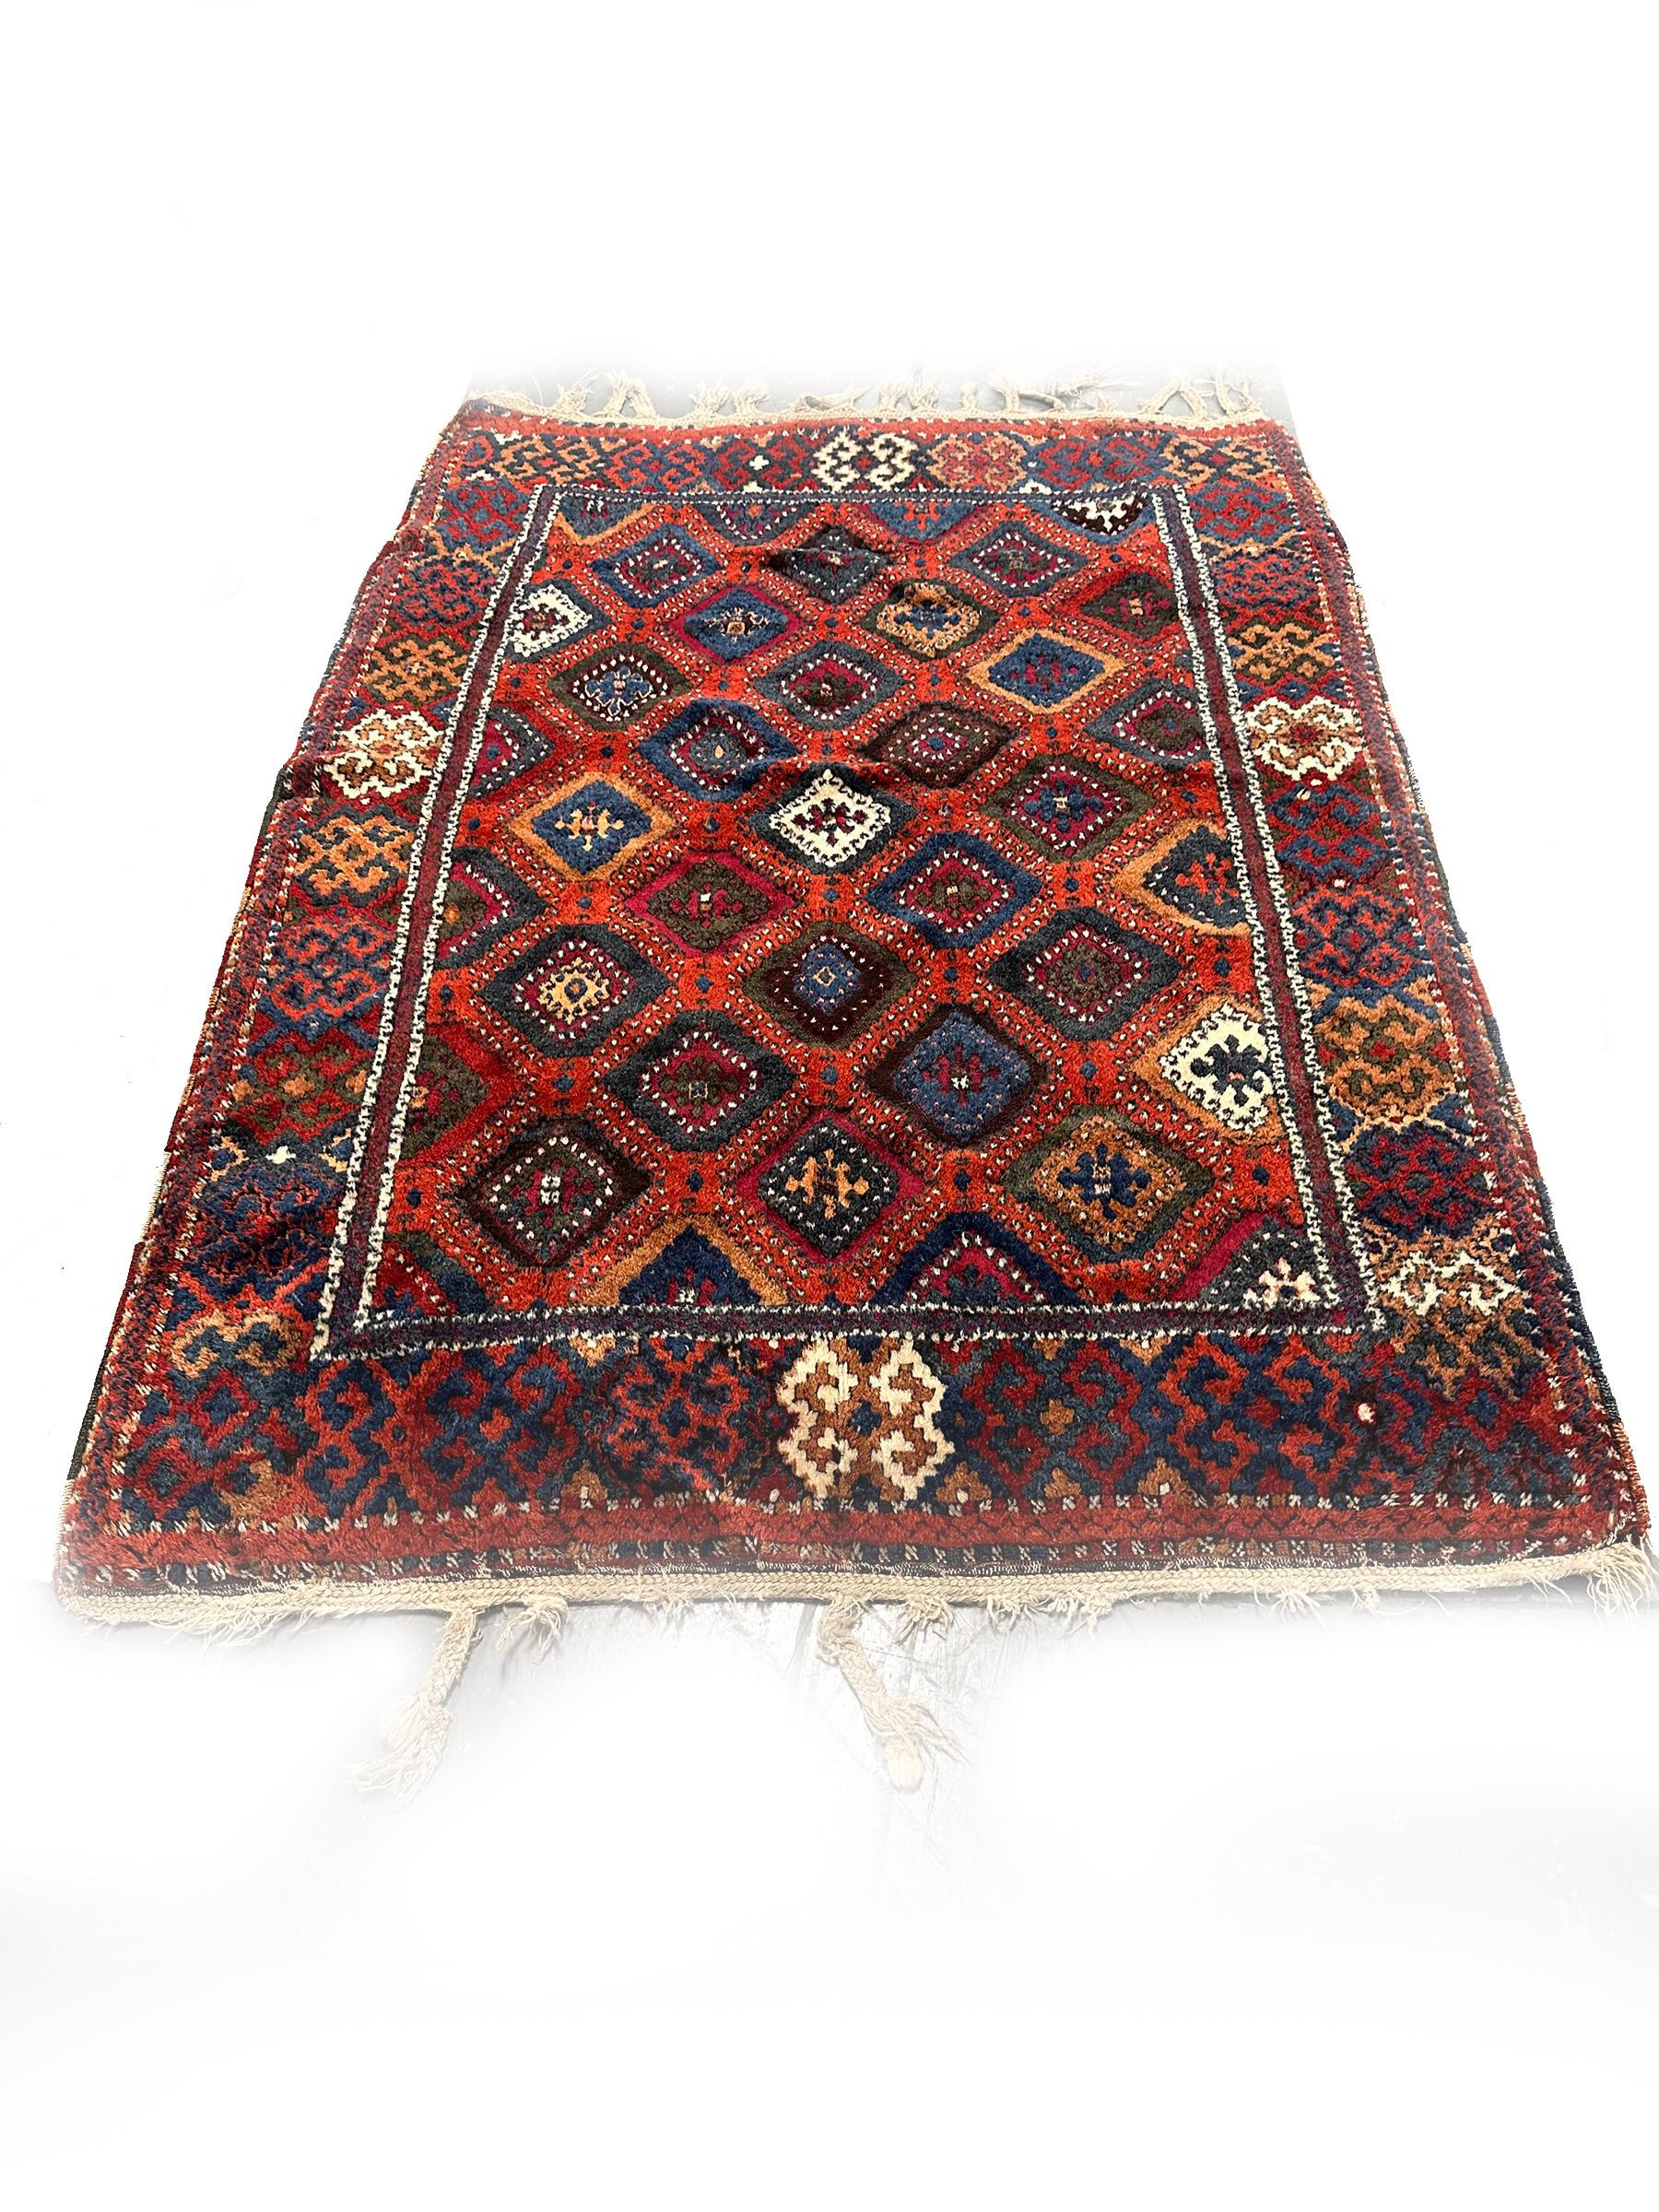 Hand-Knotted 1880 Rare Antique Turkish Rug Tribal Geometric 4x6 130cm x 170cm For Sale